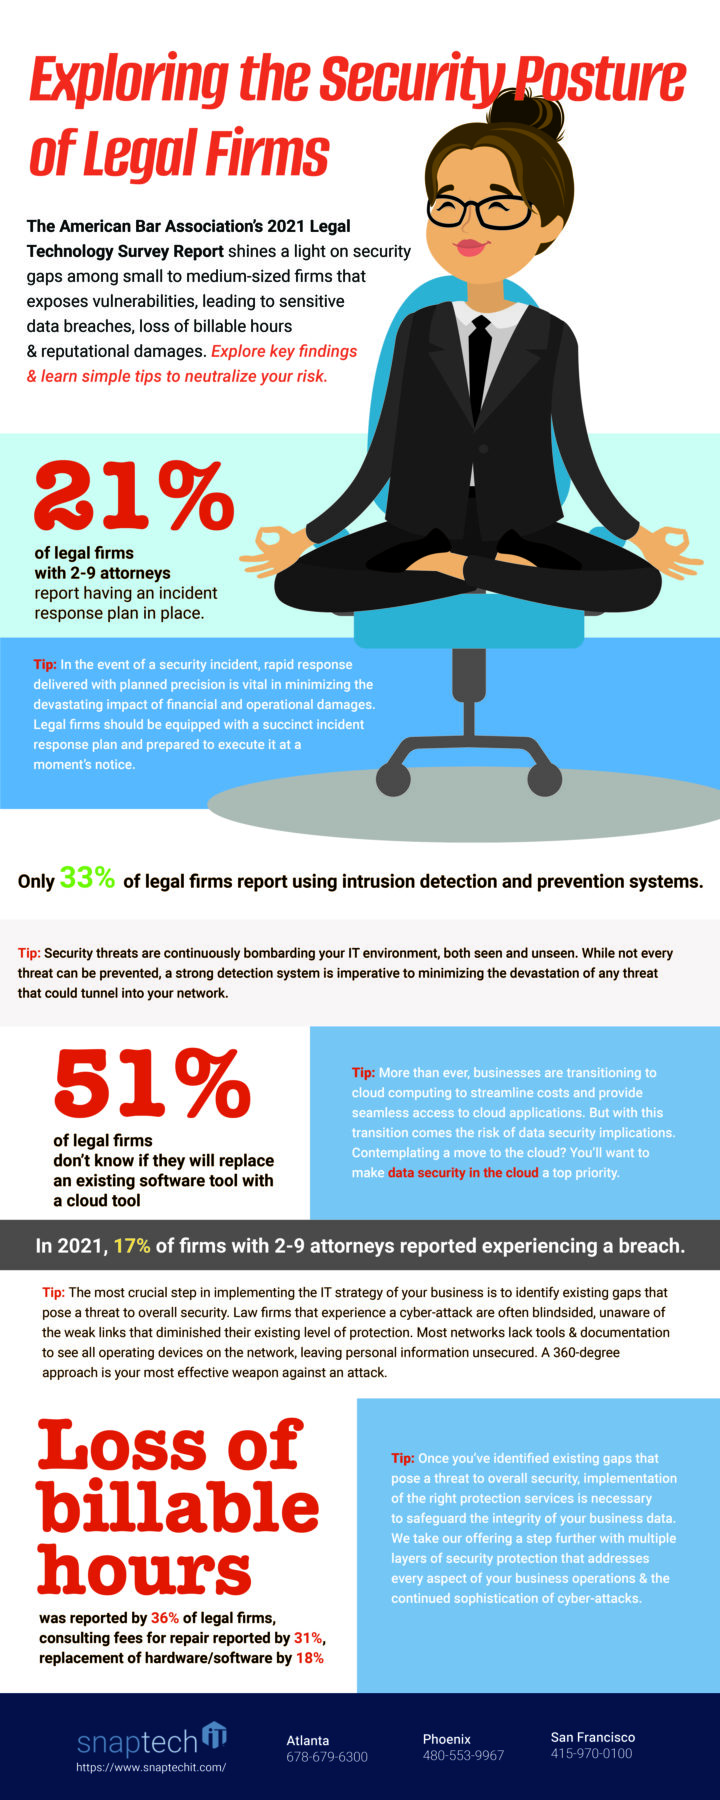 Exploring the Security Posture of Legal Firms